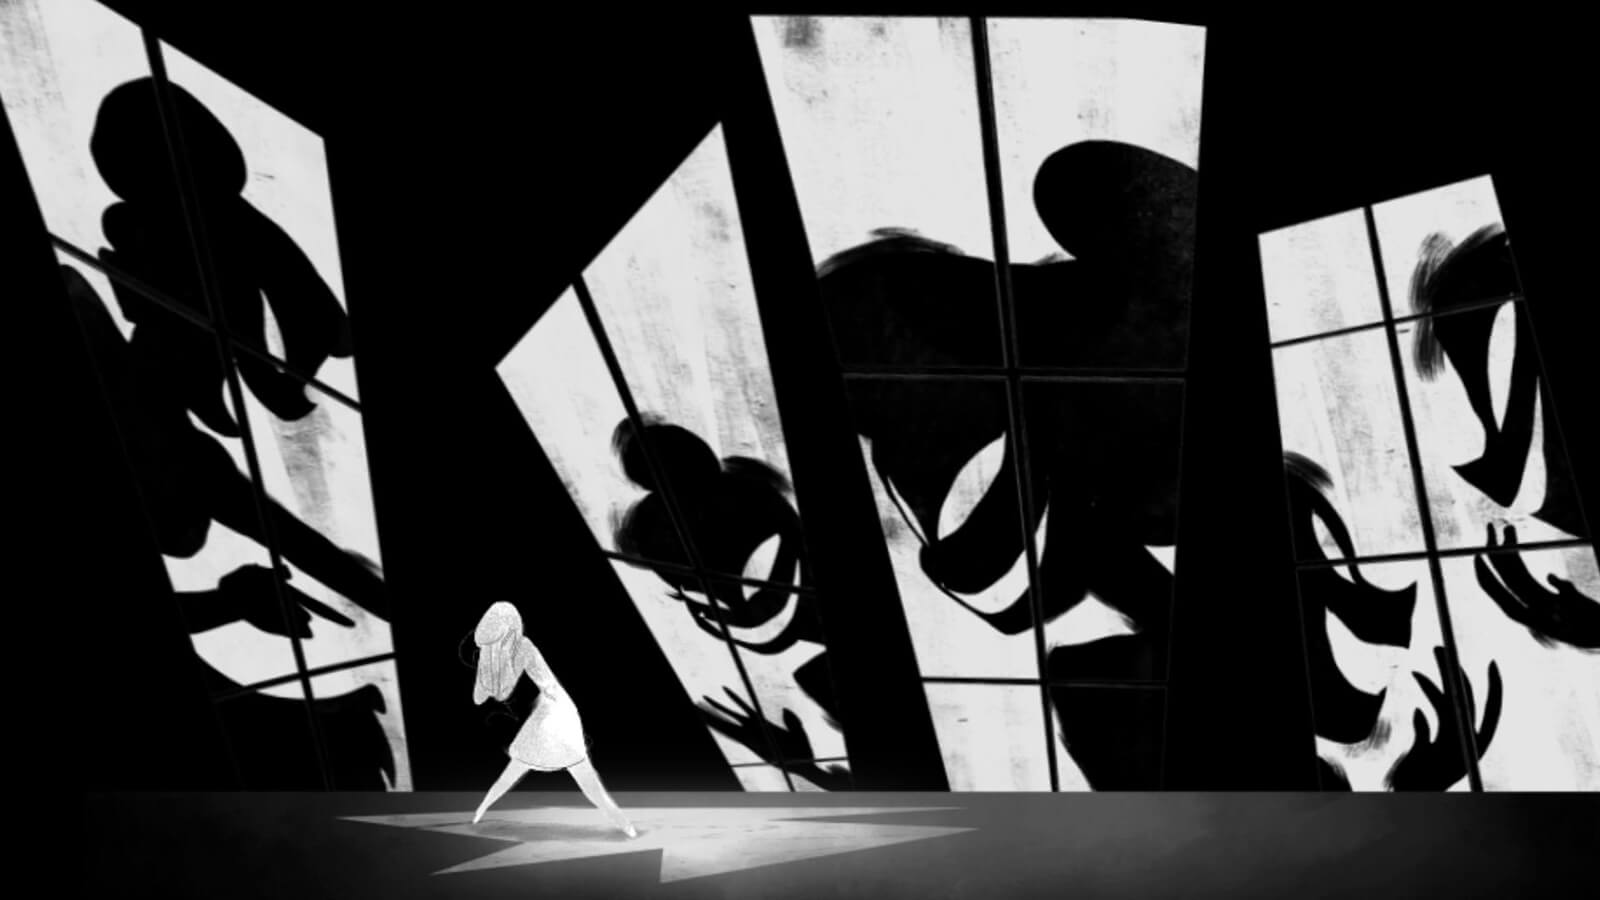 Shadows of judgmental, scowling figures superimposed over large deformed windows surround the colorless form of a cowering young woman.